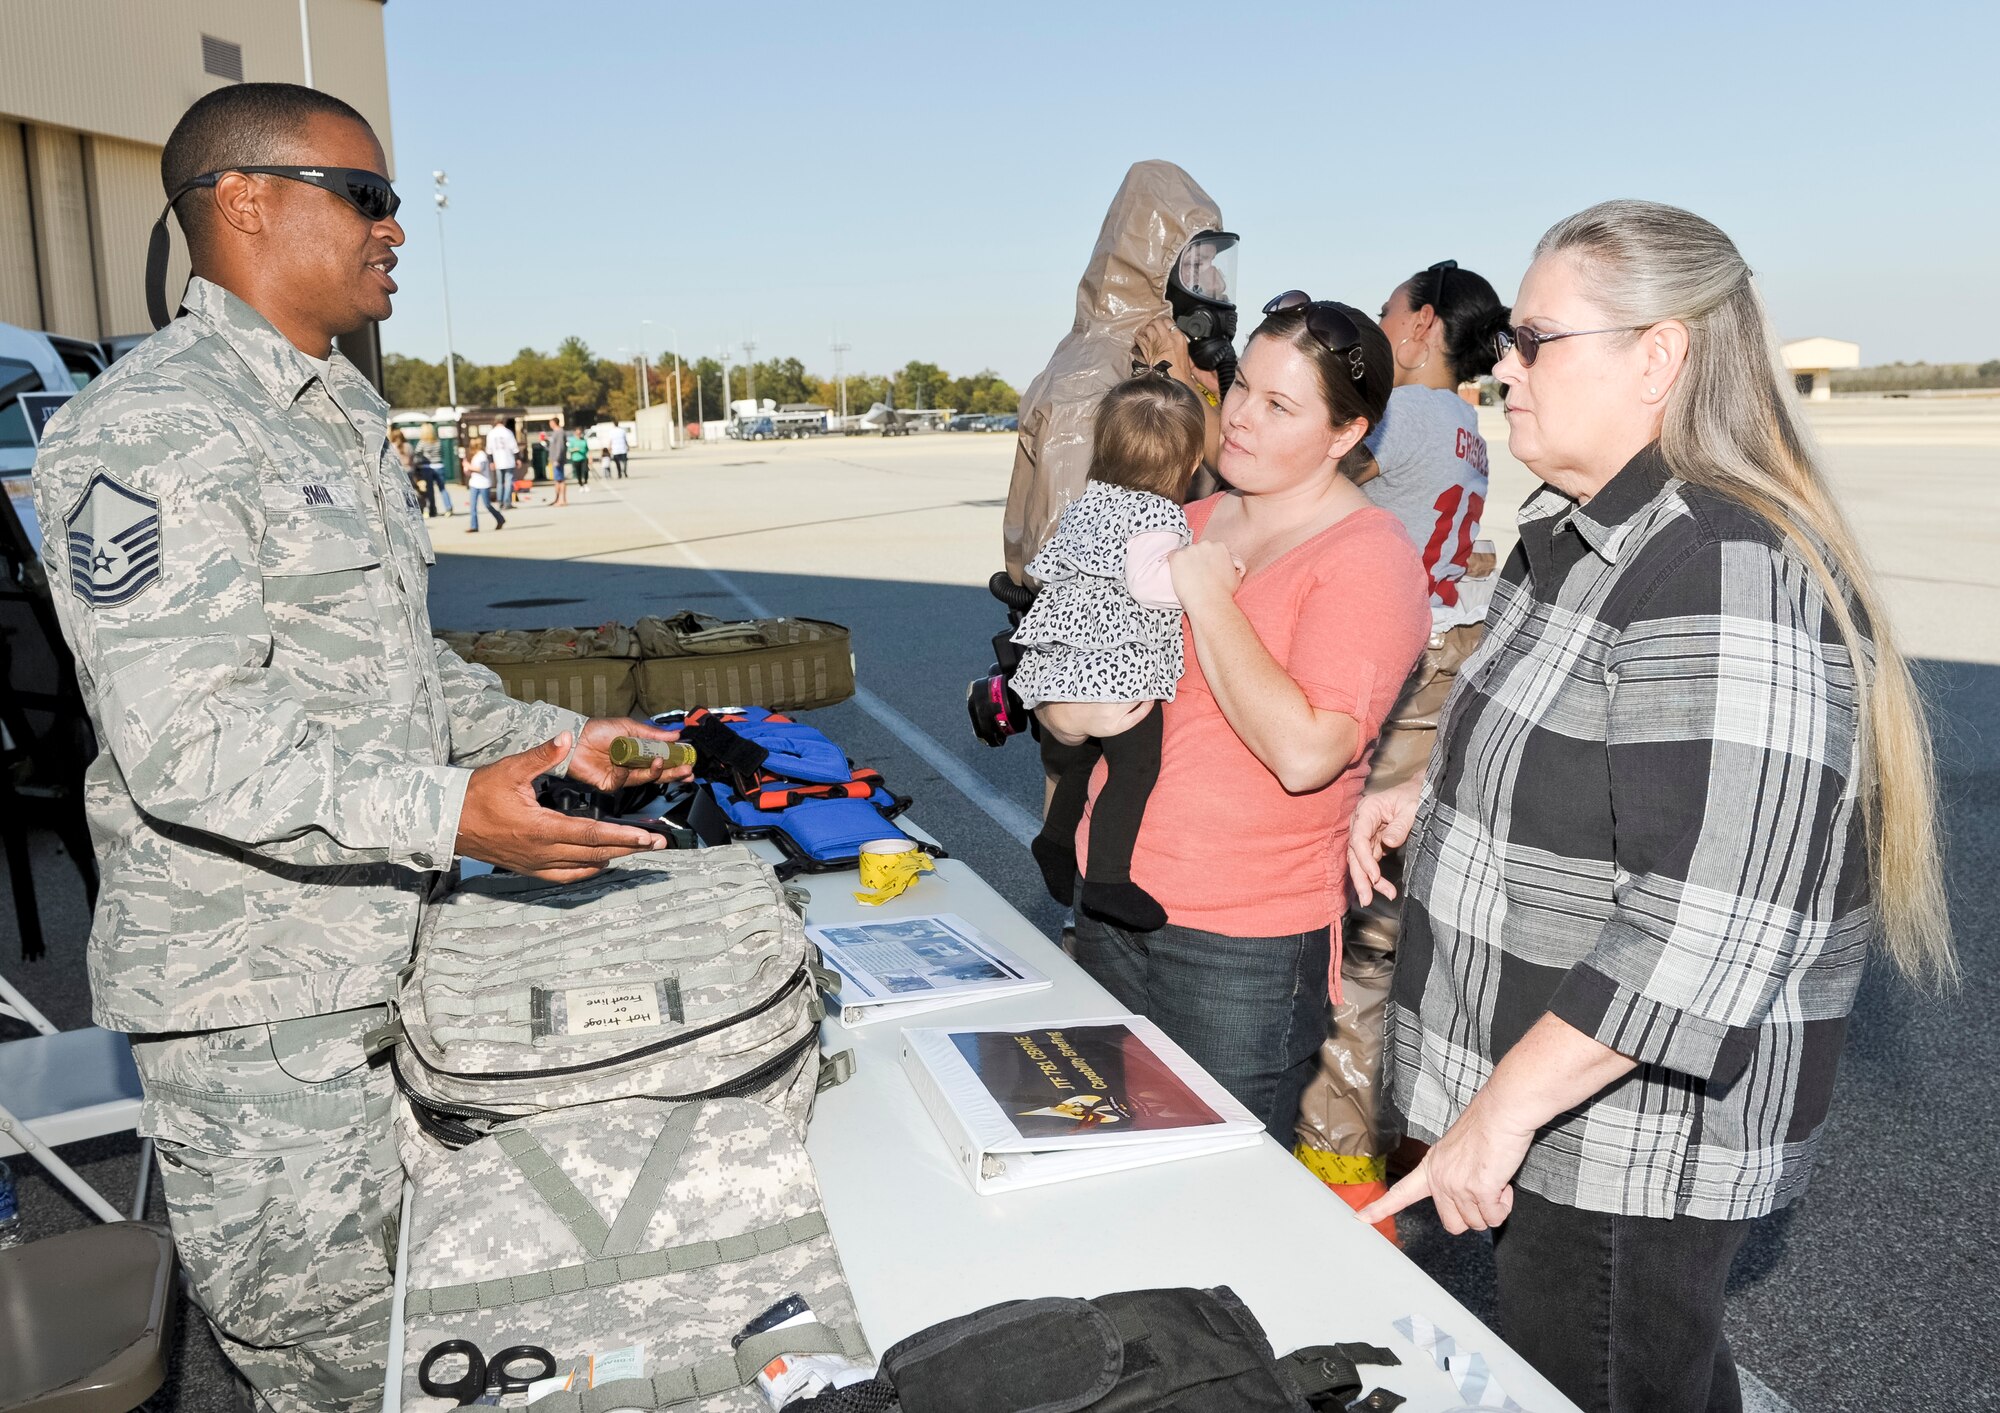 Master Sgt. Benny Smith, 116th Medical Group, 78th Joint Task Force, medical logisitic technician, explains the mission of the 78th JTF during the 116th and 461st Air Control wings annual Family Day celebration at Robins Air Force Base, Ga., Nov. 3, 2012. Family Day gave the 78th JTF personnel an opportunity to bring awareness to their mission to respond to domestic incidents as directed by the Governor.  (National Guard photo by Master Sgt. Roger Parsons/Released)